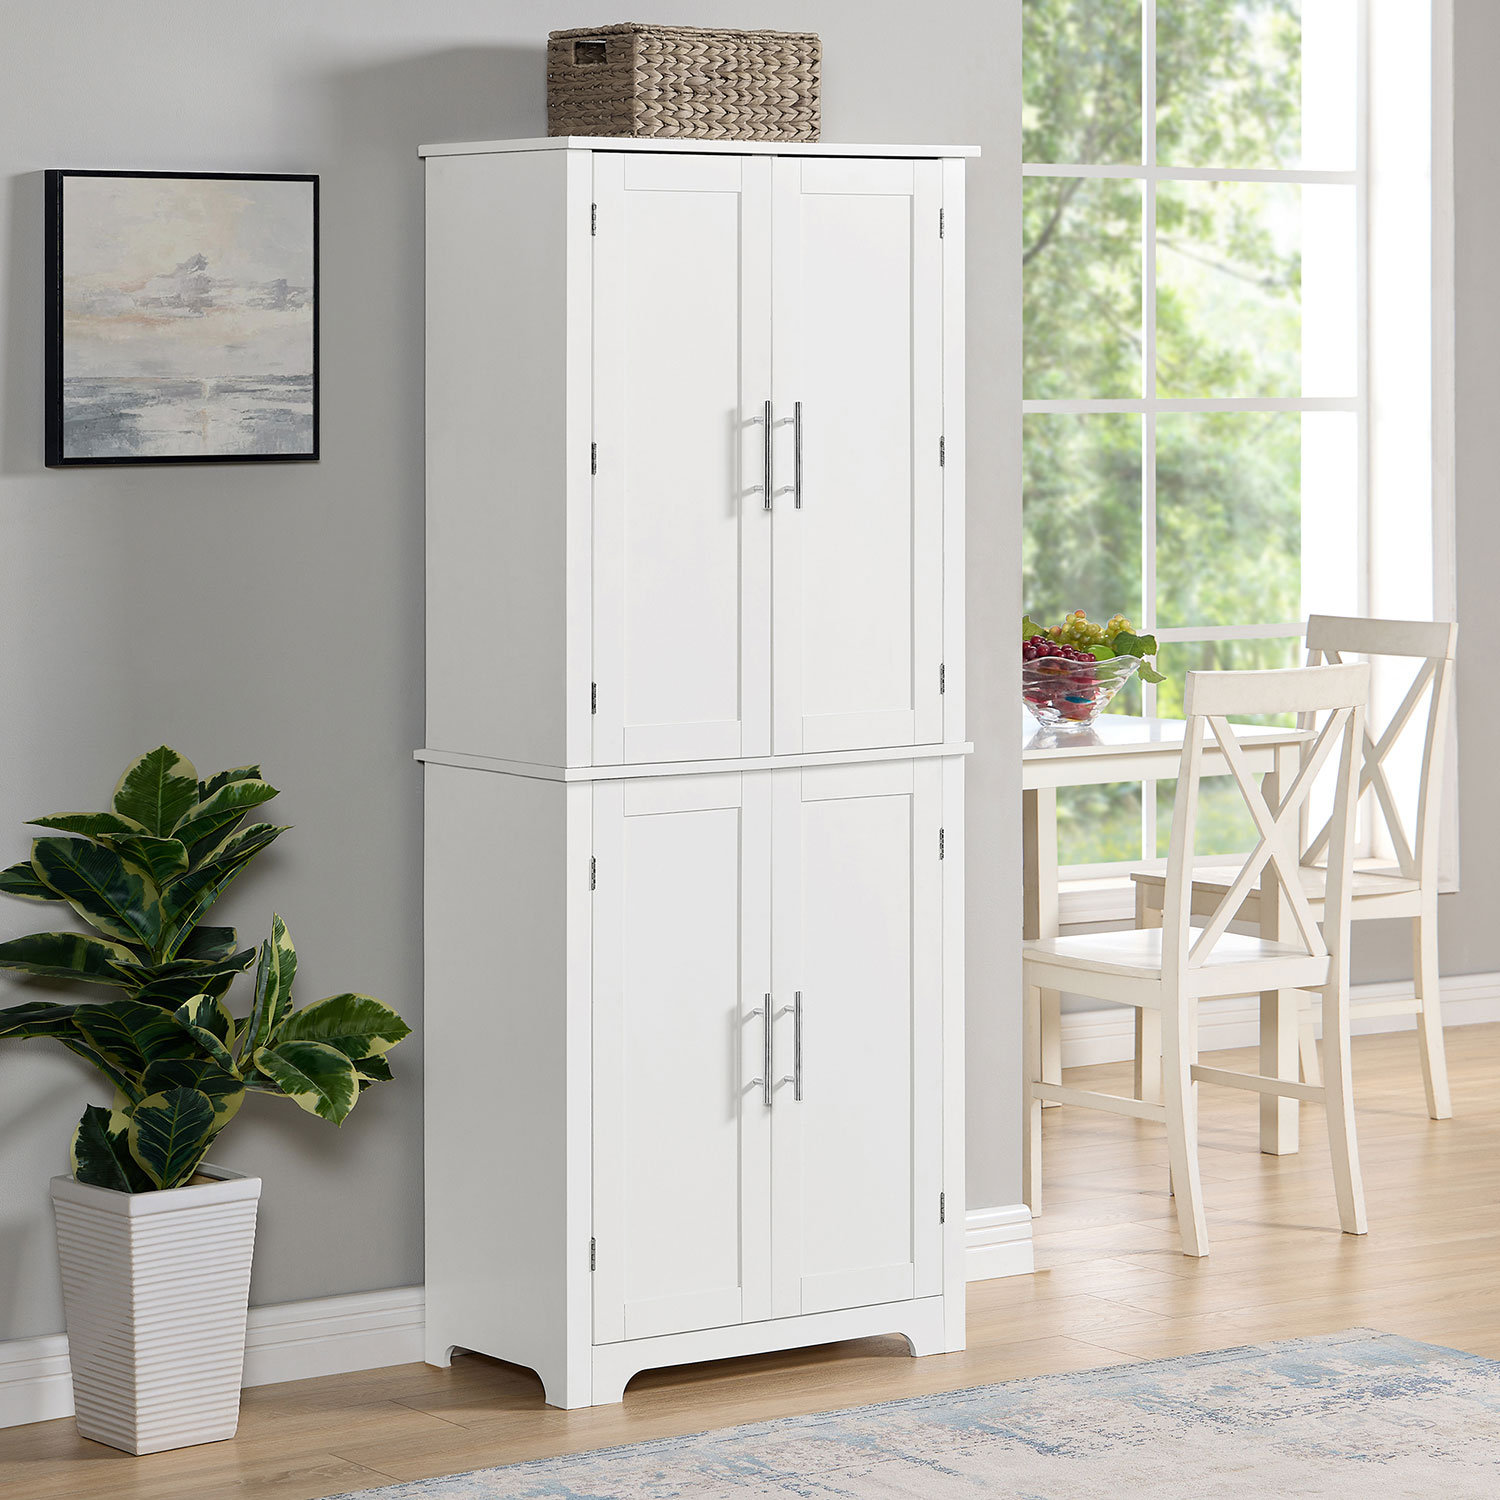 28.15 in. W x 15 in. D x 67.4 in. H White Wood Linen Cabinet with Adjustable Shelf and Storage Racks